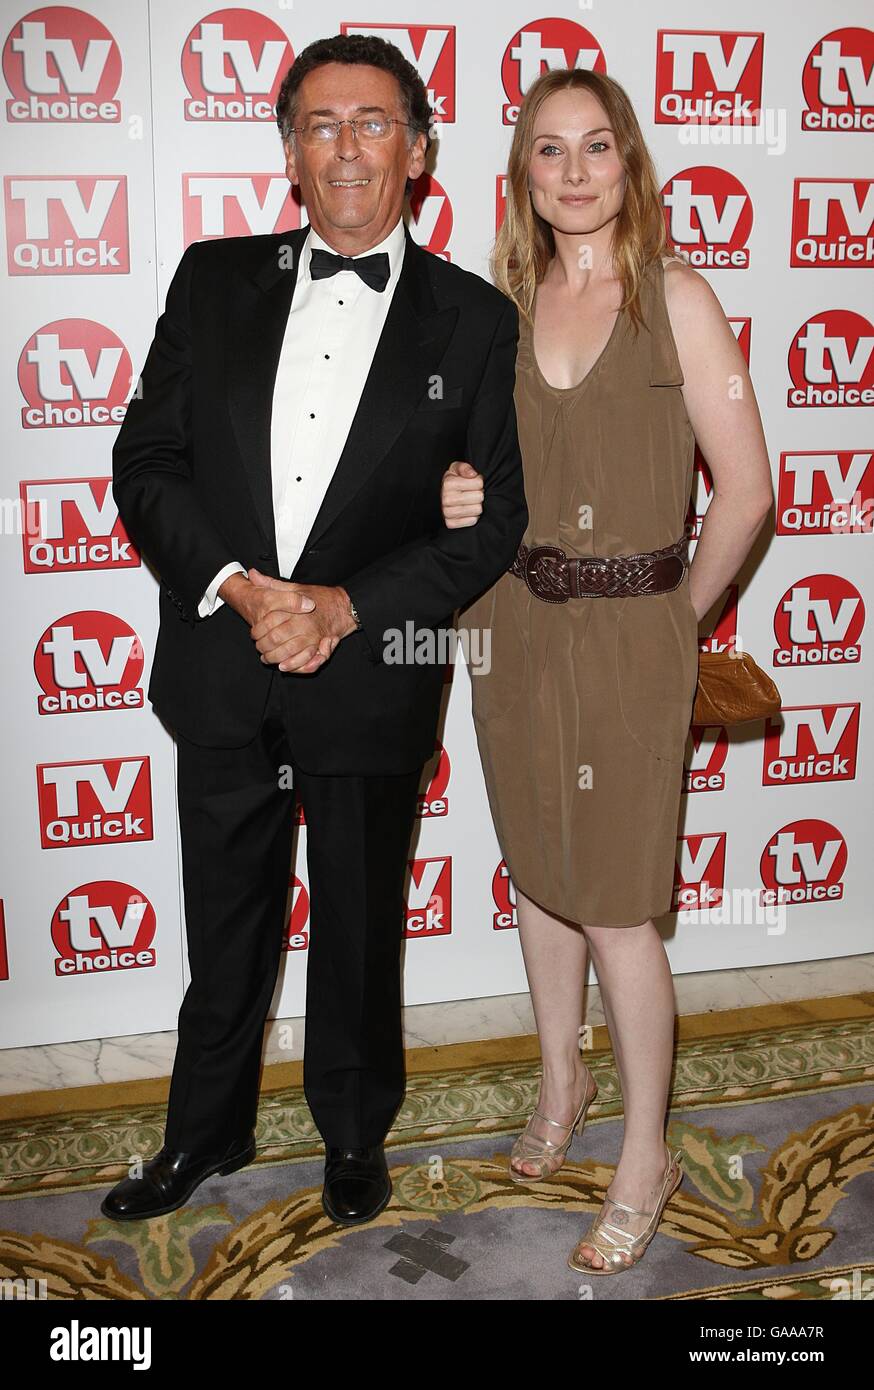 TV Quick and TV Choice Awards - Arrivals - London. Robert Powell and Rosie Marcel arriving for the TV Quick and TV Choice awards at The Dorchester, London. Stock Photo